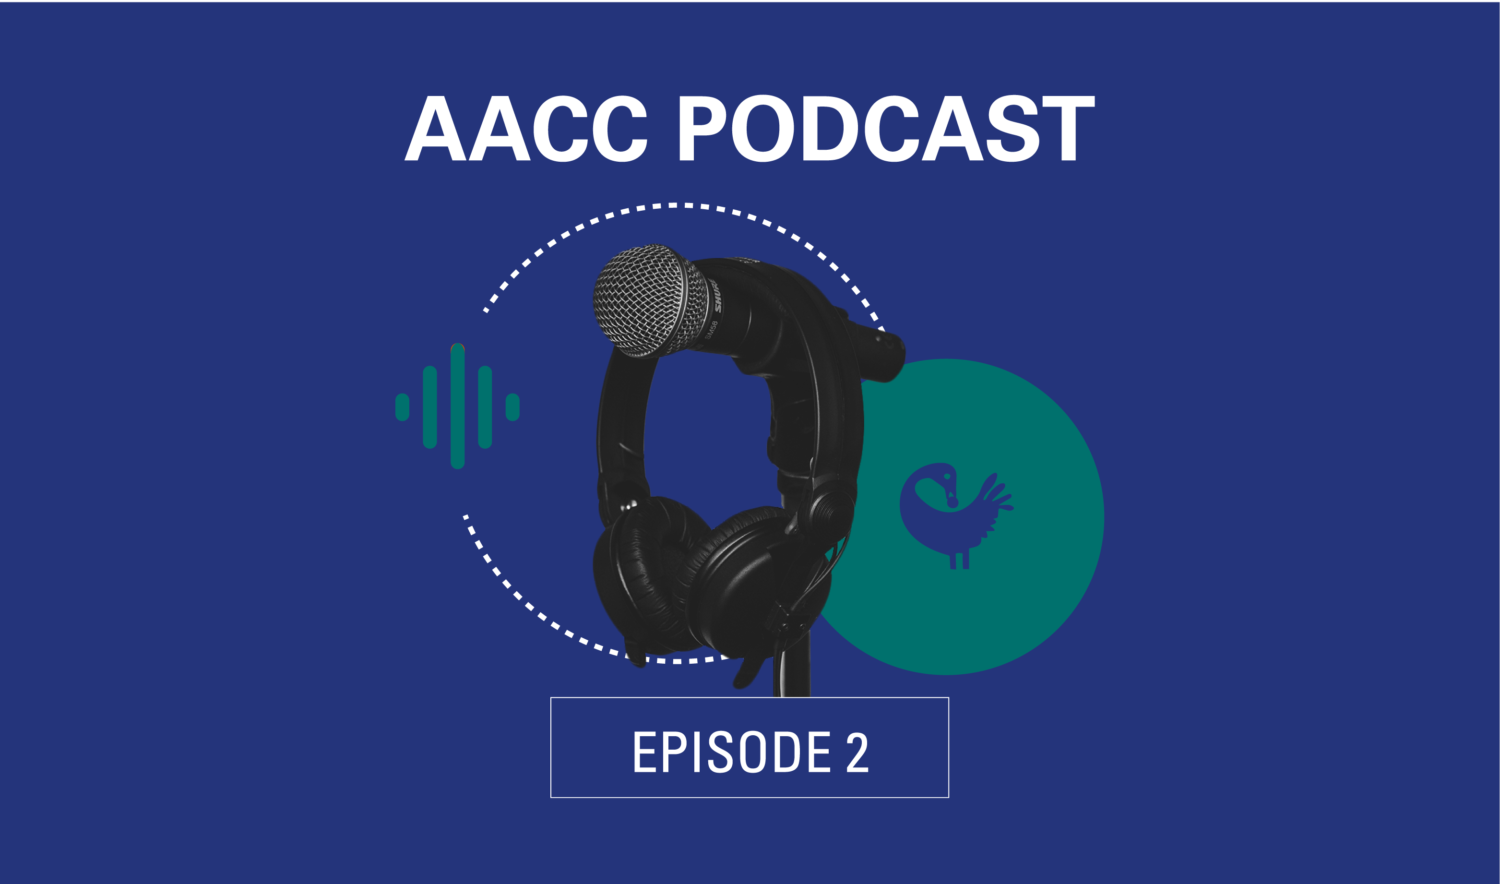 AACC Podcast Episode 2